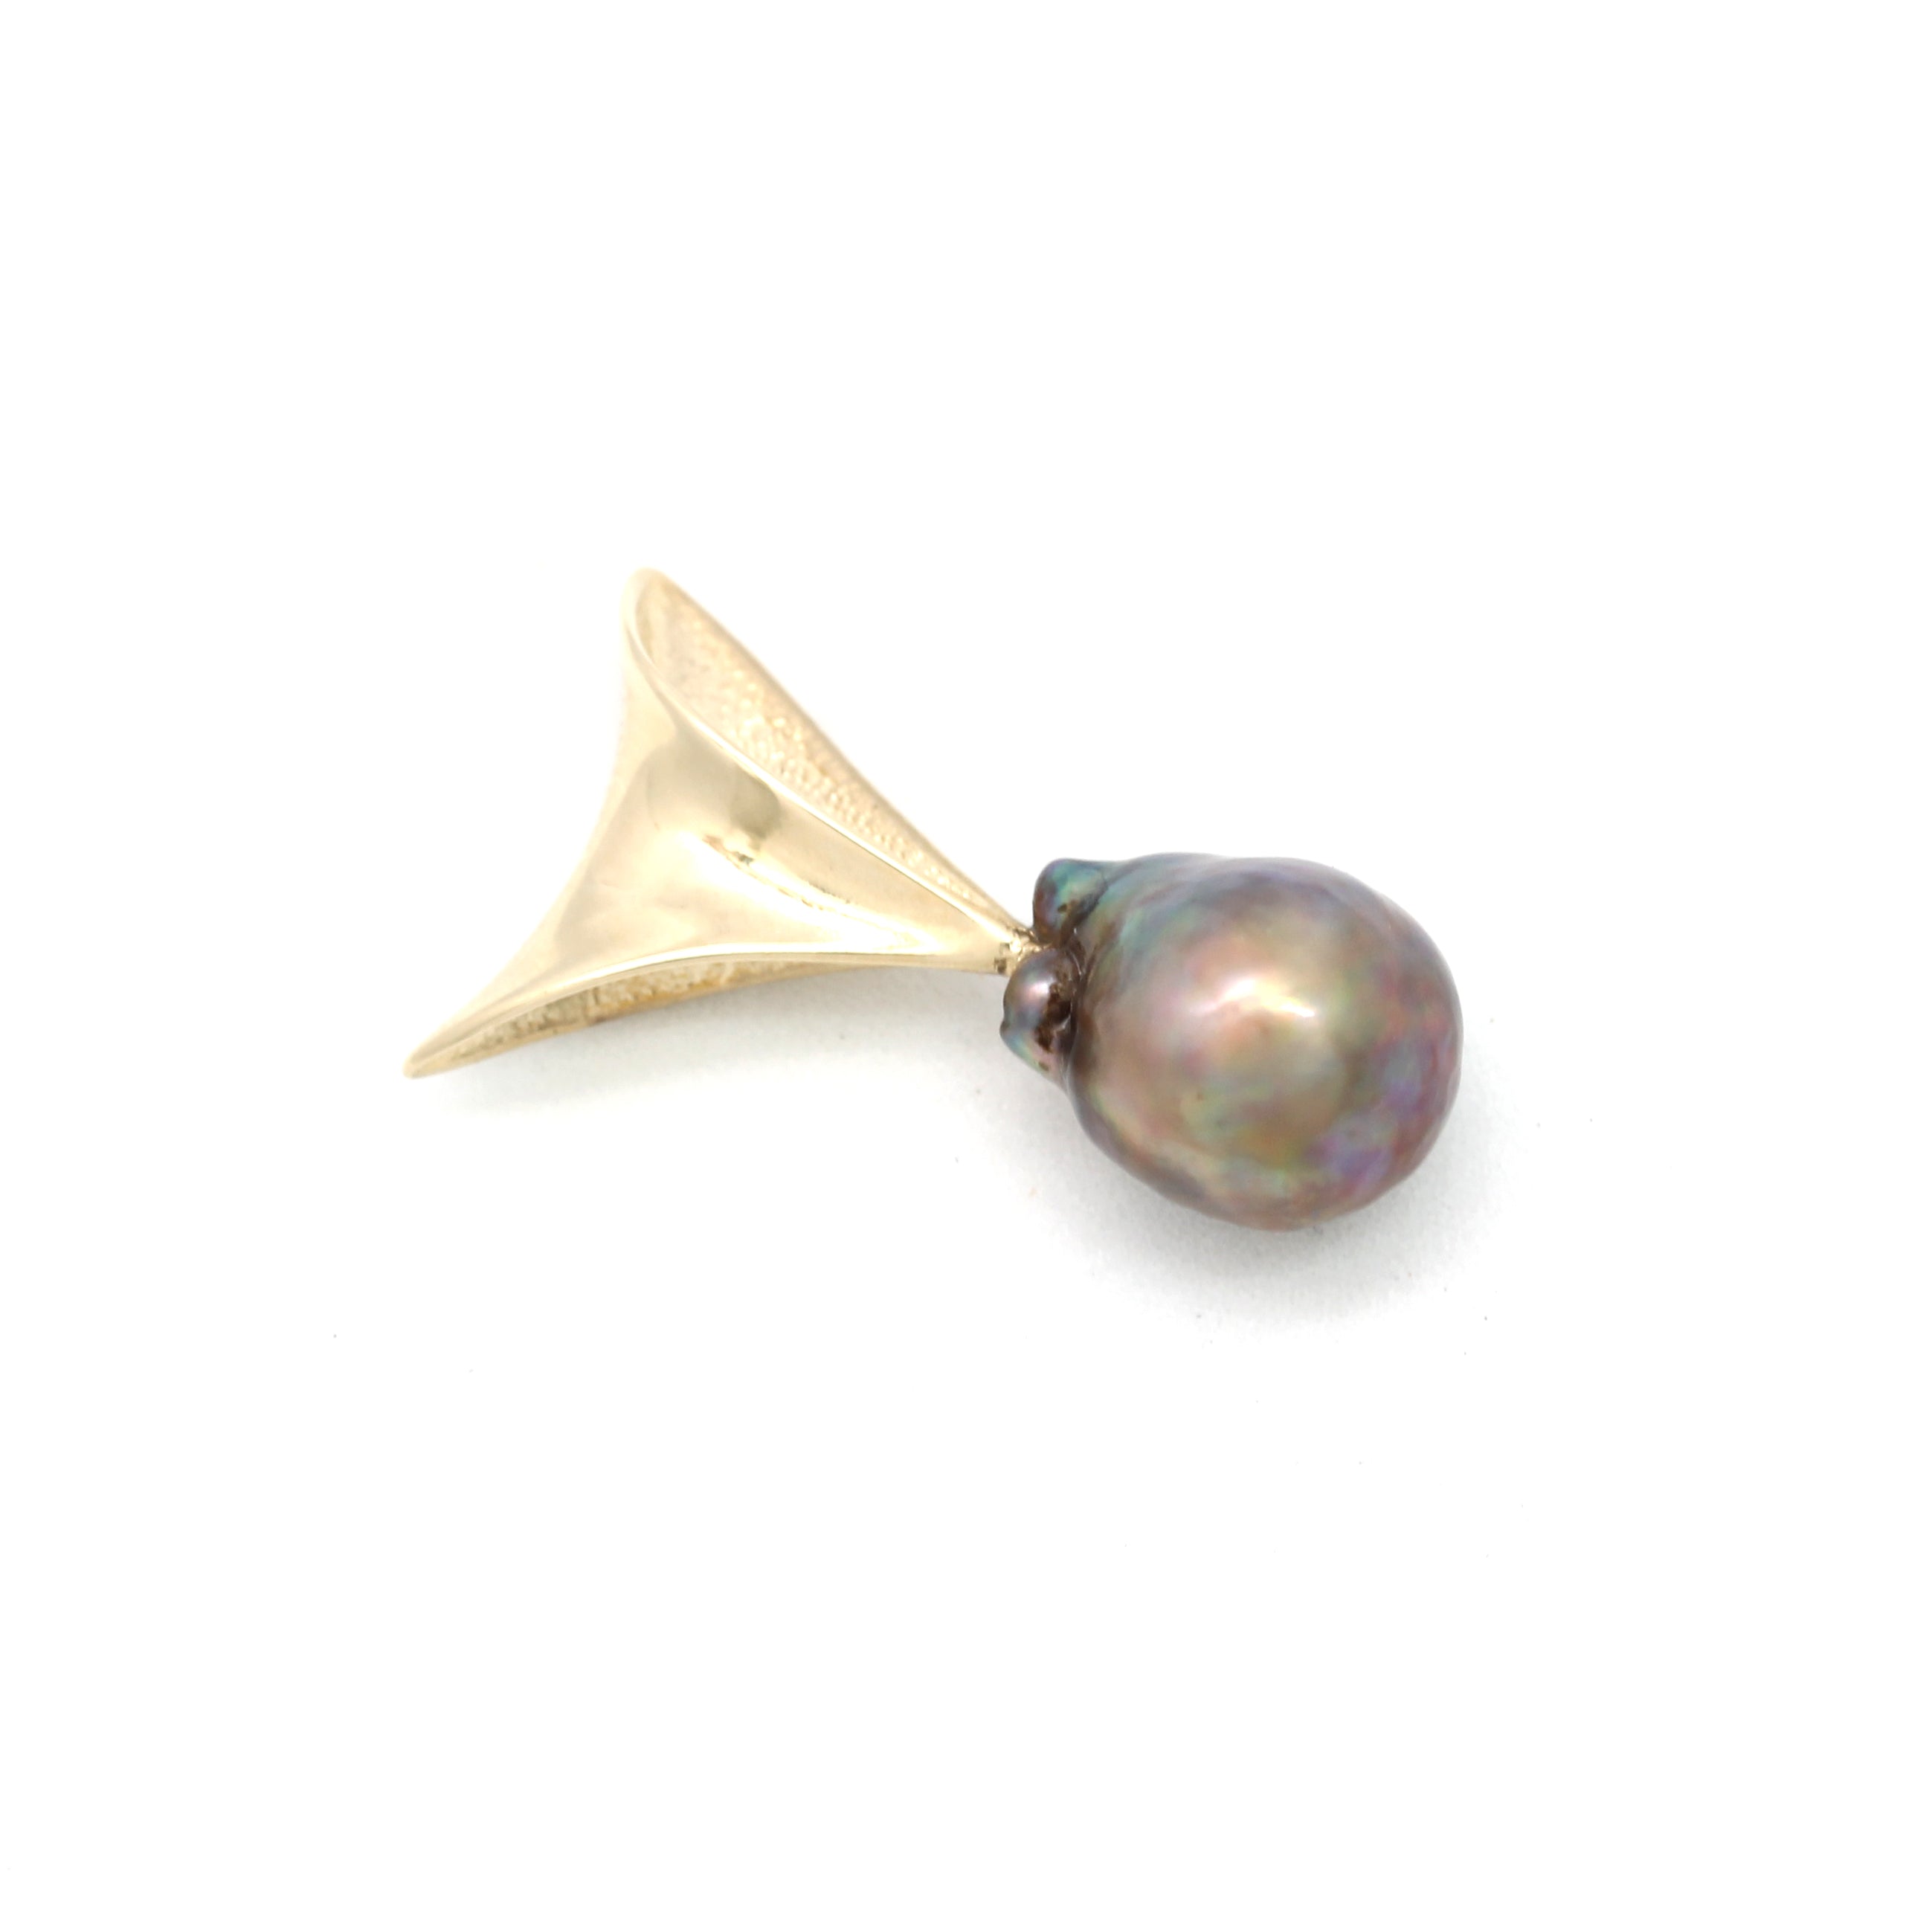 "Ventus" 14K Yellow Gold Pendant with Cortez Pearl